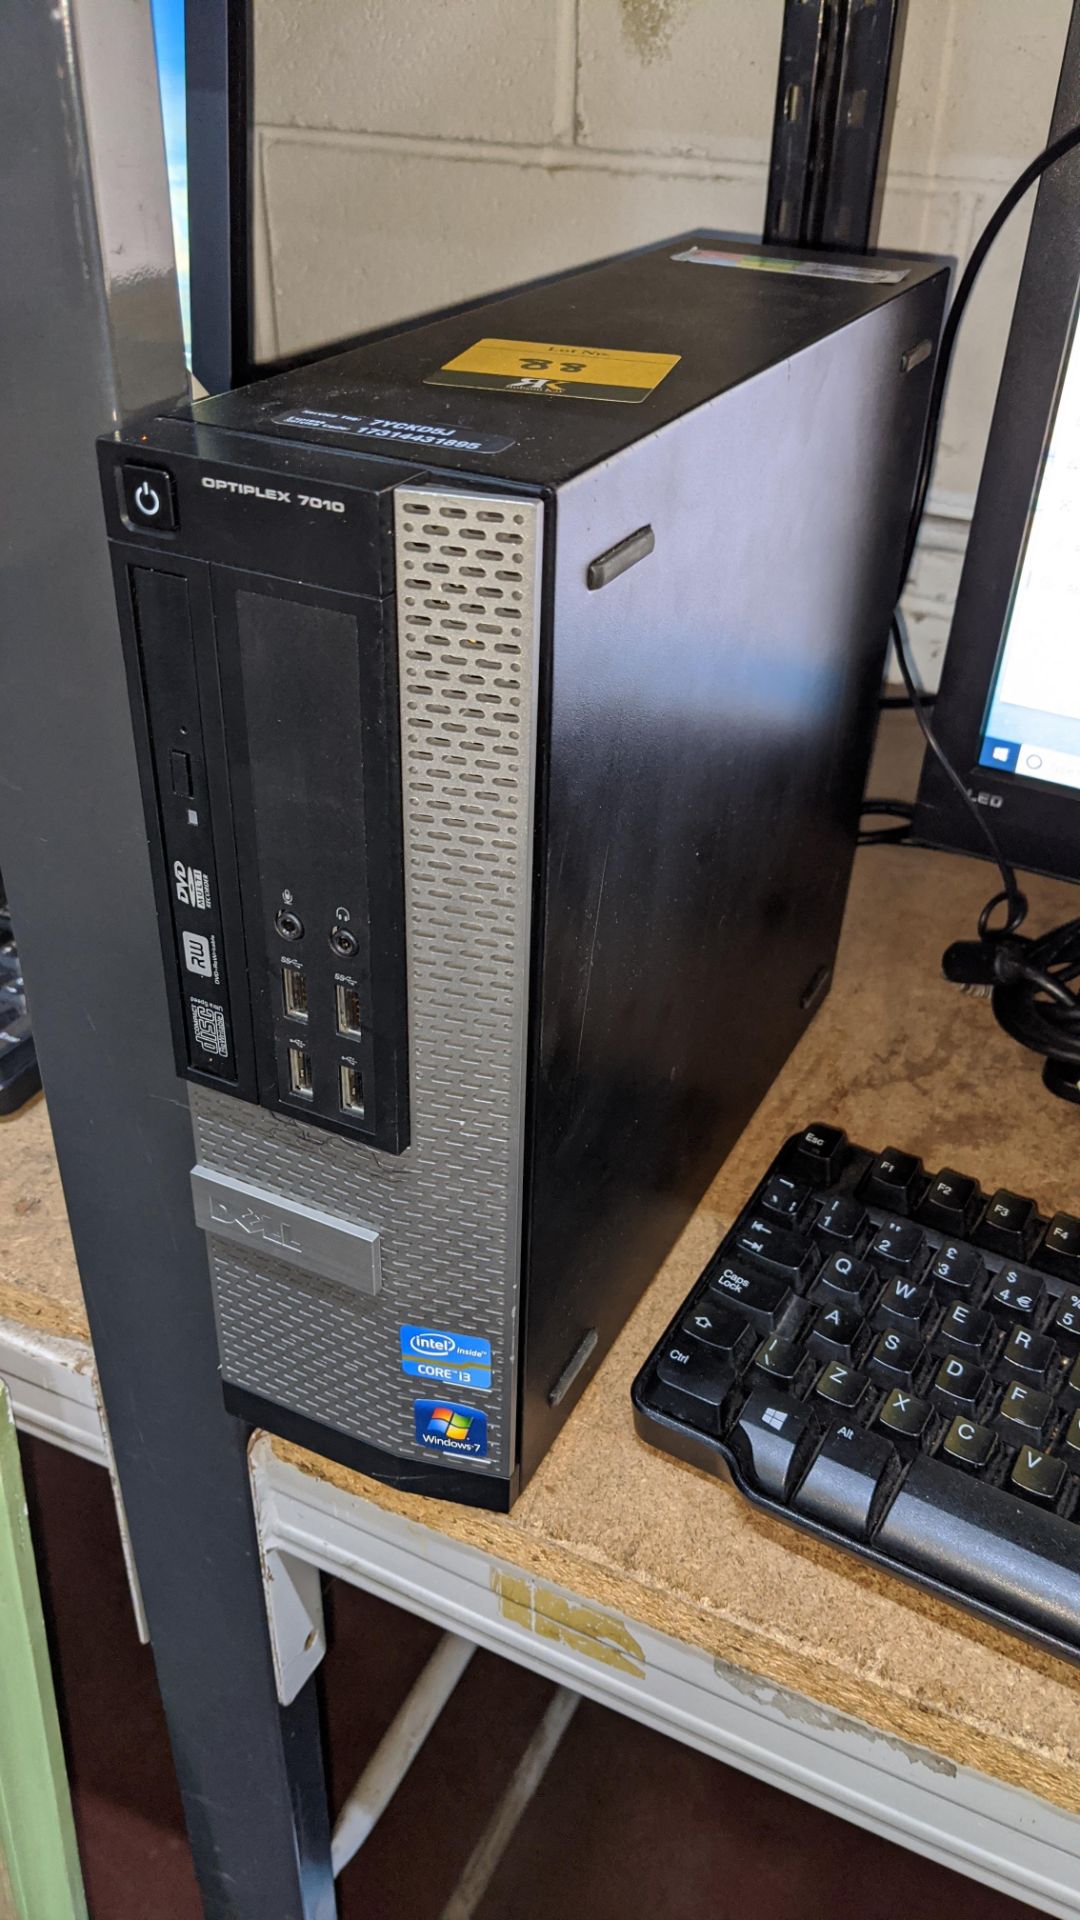 Dell Optiplex 7010 tower computer with Intel Core i3-2120 CPU @ 3.3GHz, 8Gb RAM, 1Tb HDD including - Image 3 of 4